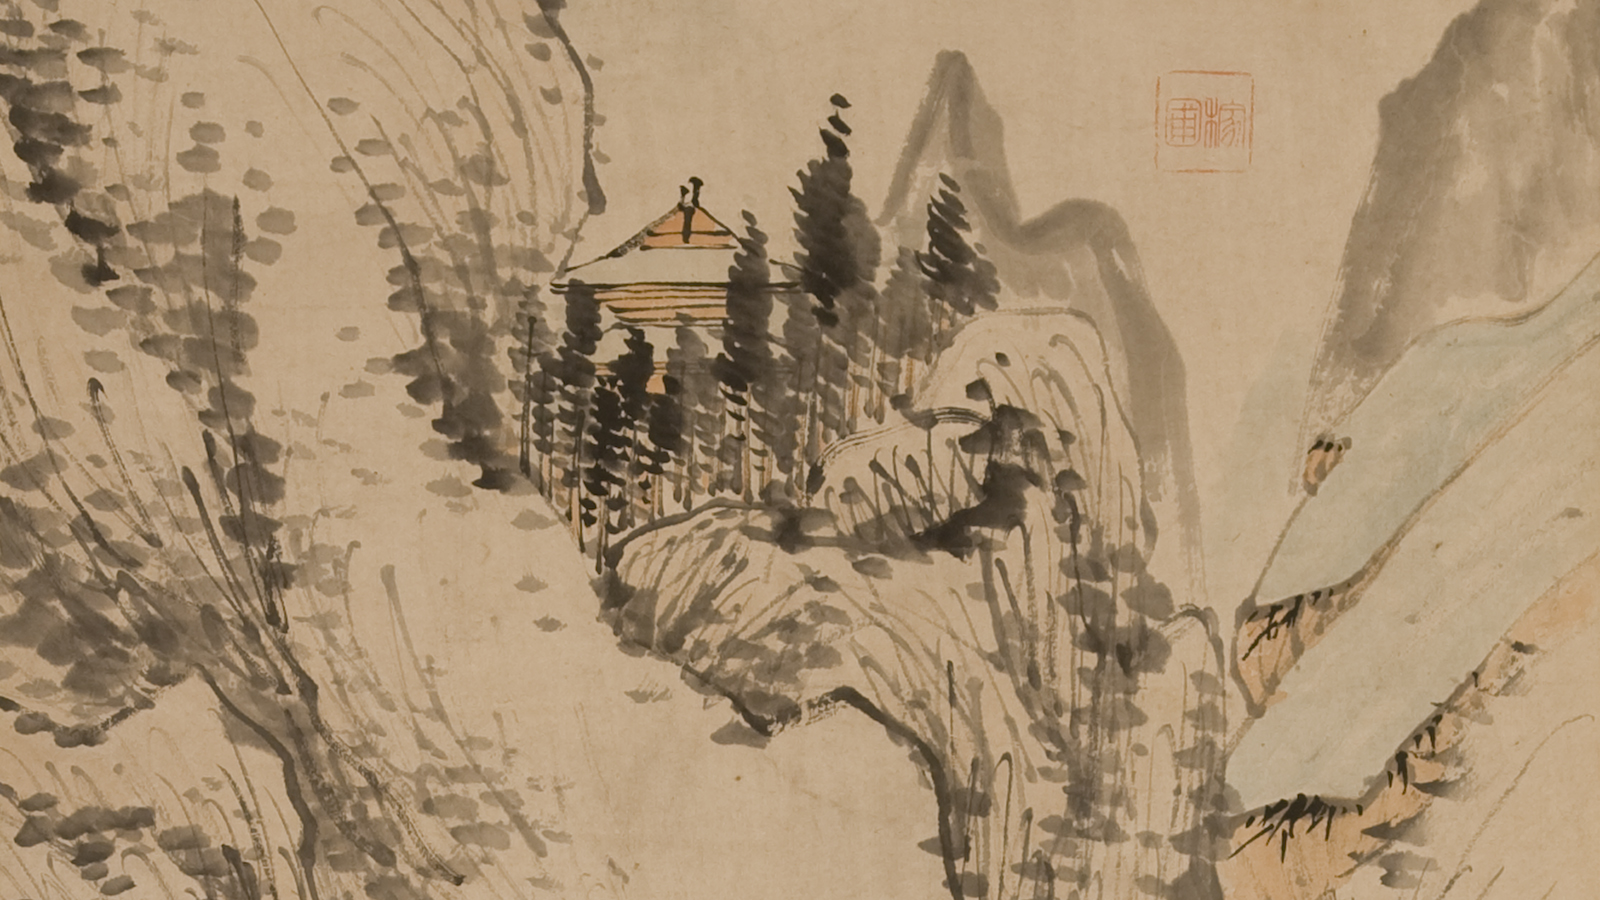 cropped image from a Chinese scroll showing a house perched on a cliff among trees